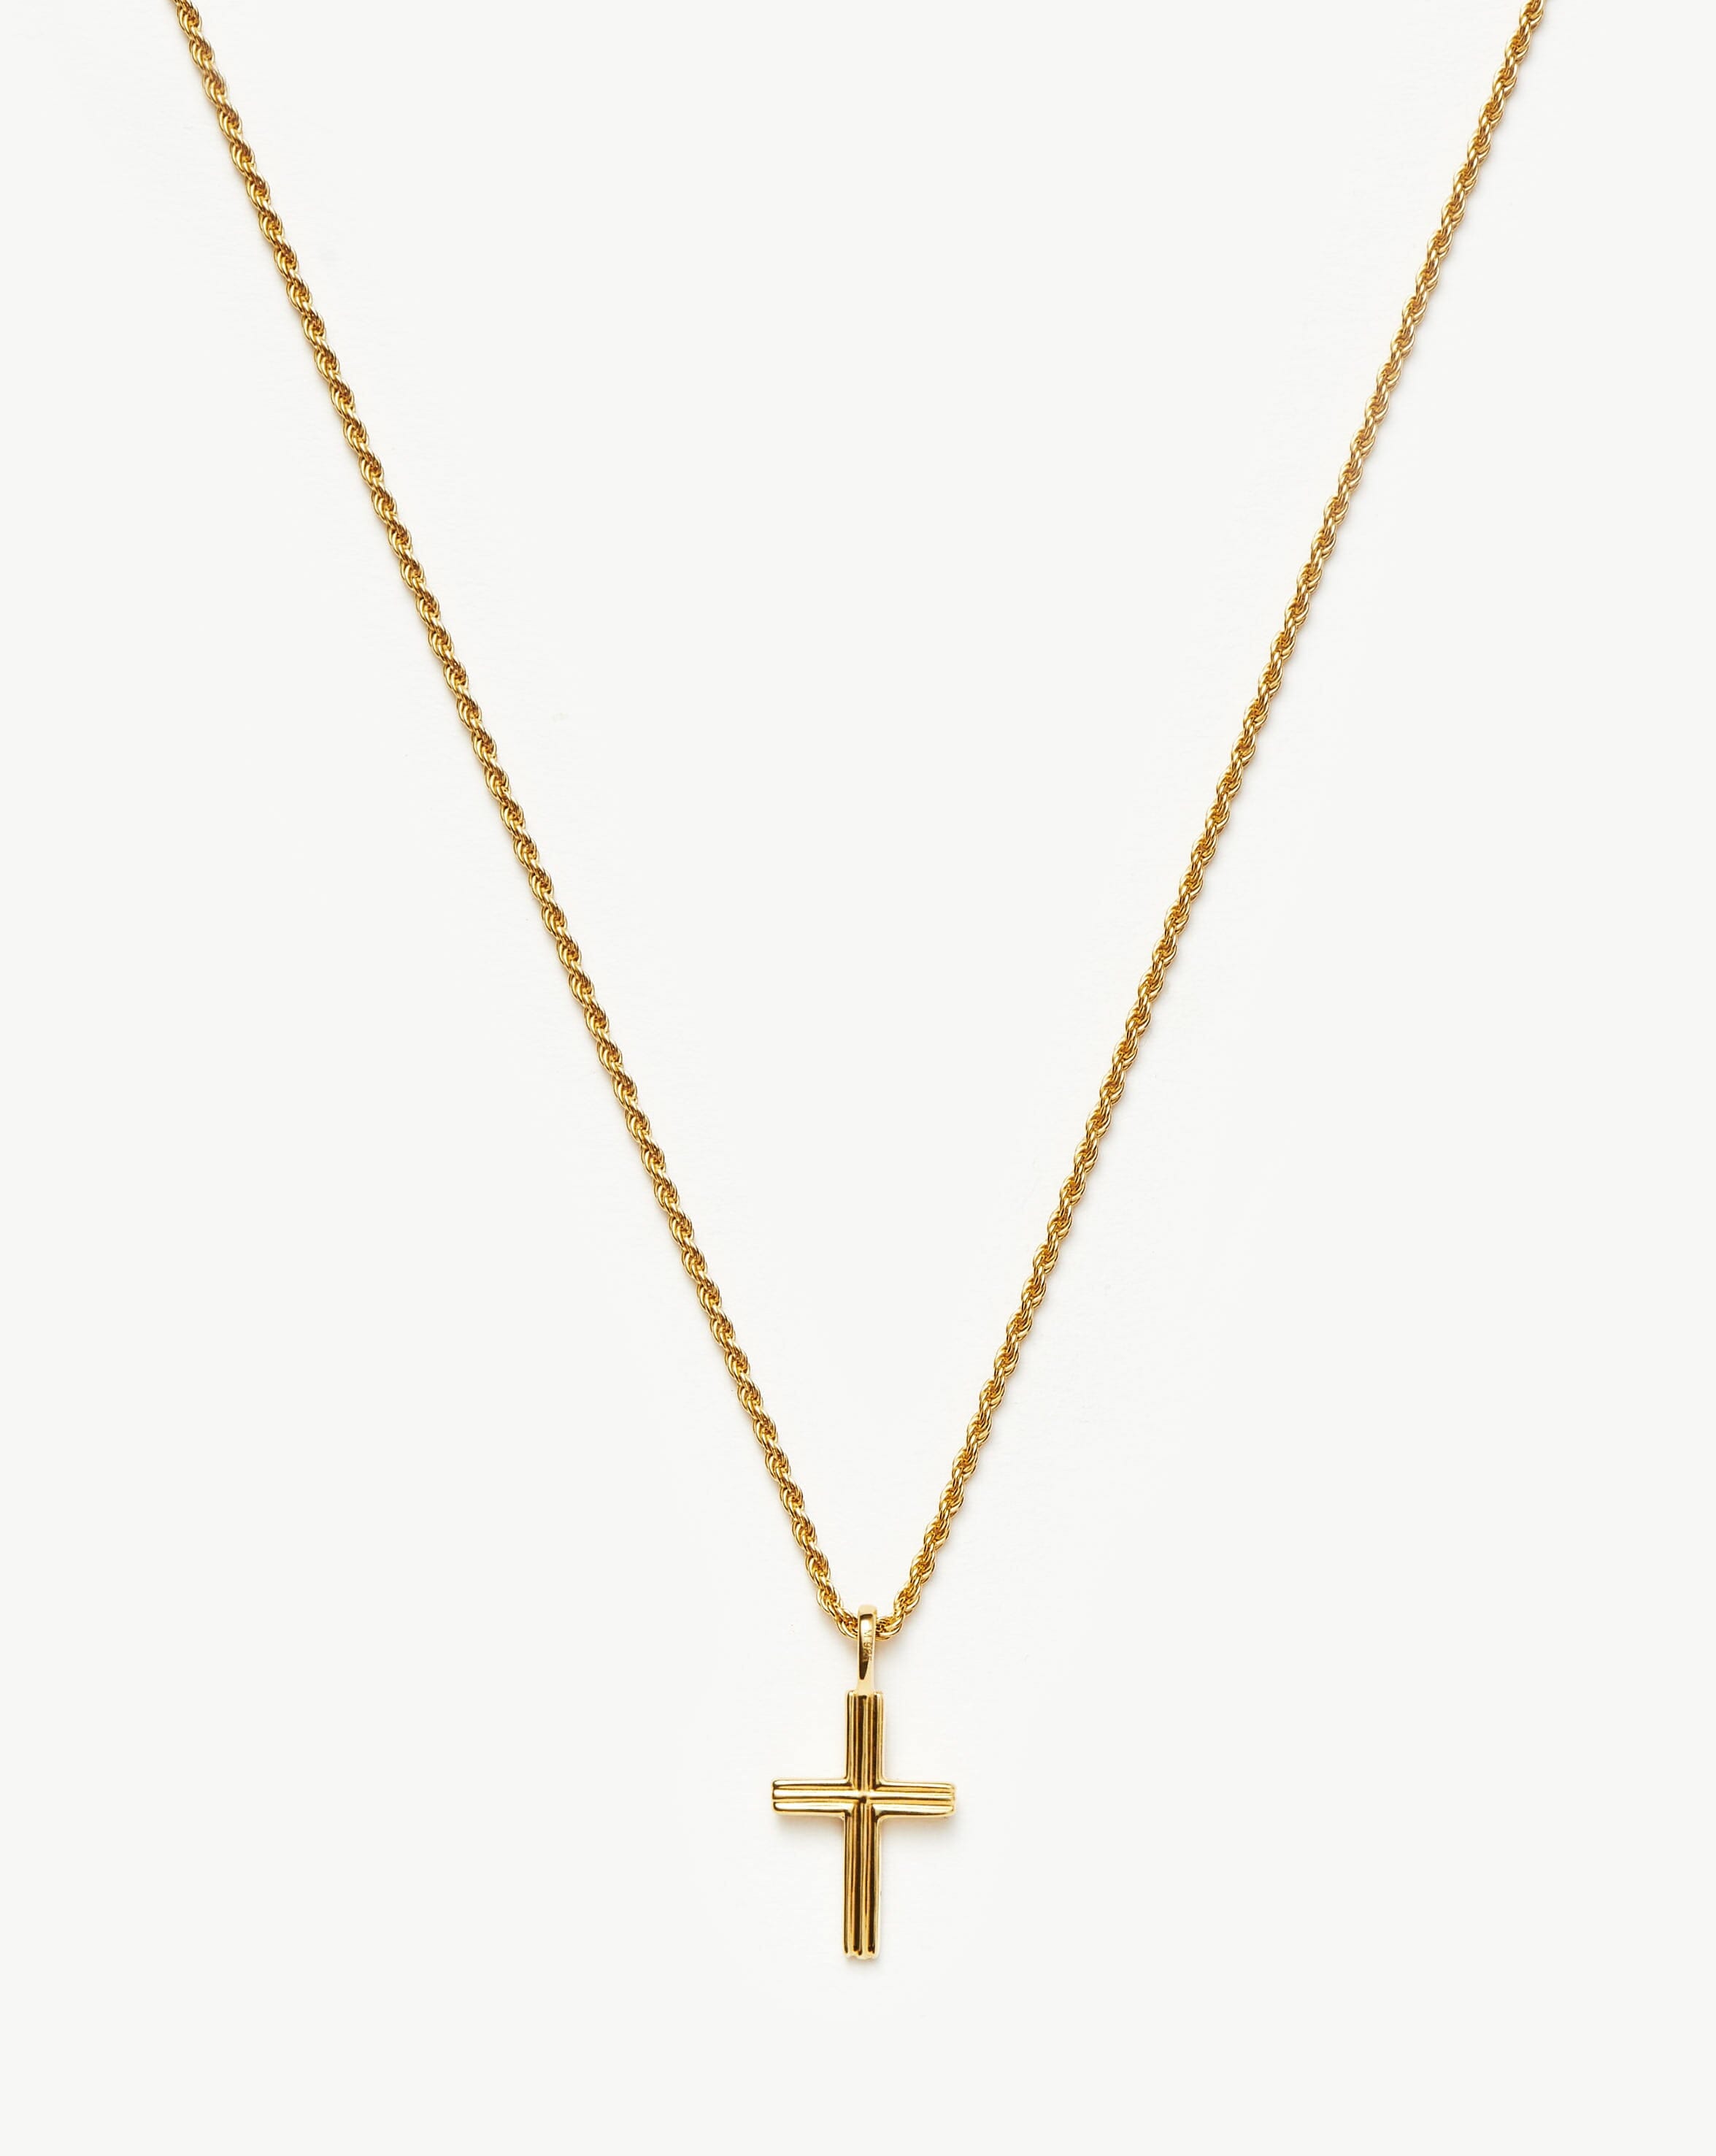 Lucy Williams Classic Cross Necklace Necklaces Missoma 